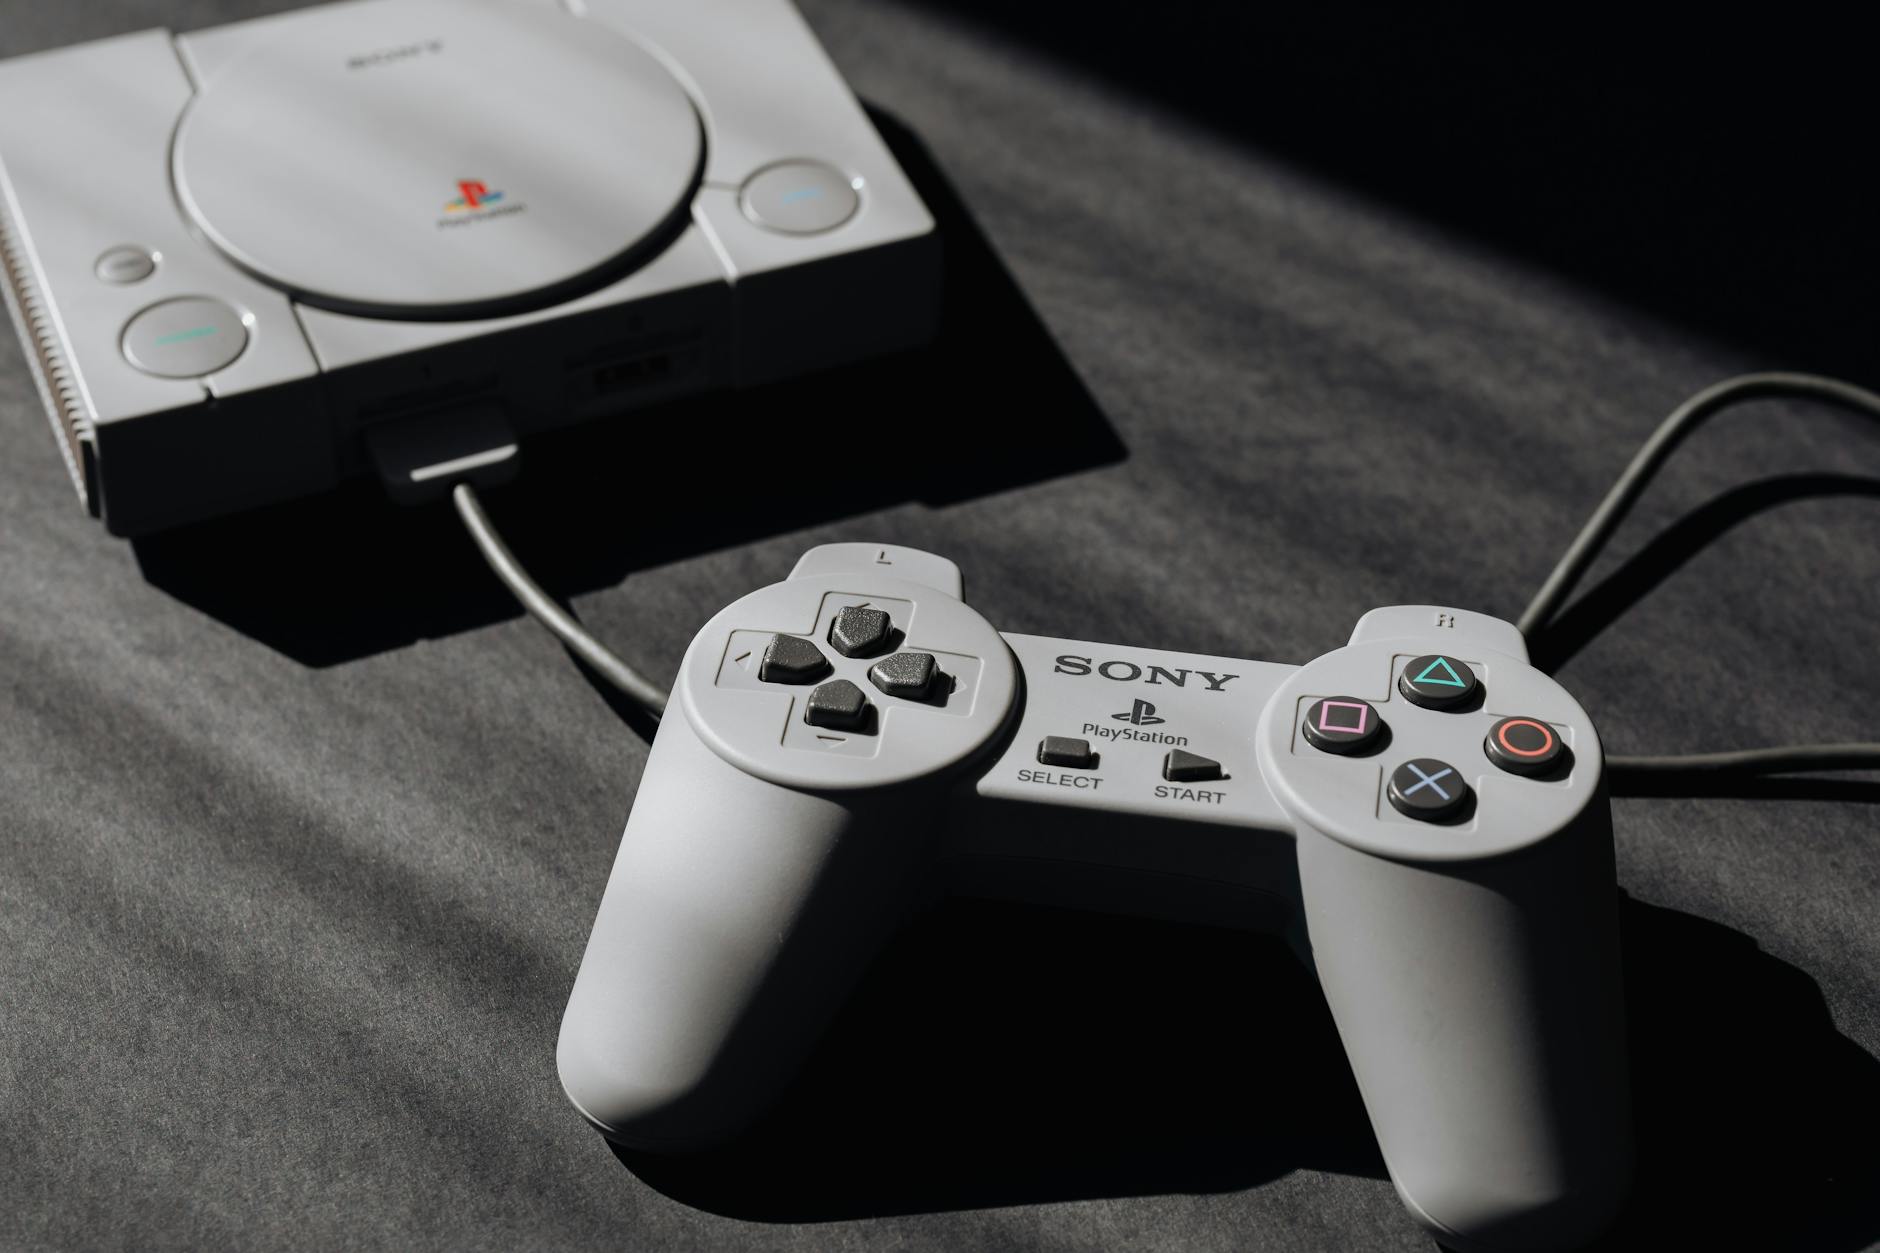 Image of a white coloured PlayStation 3